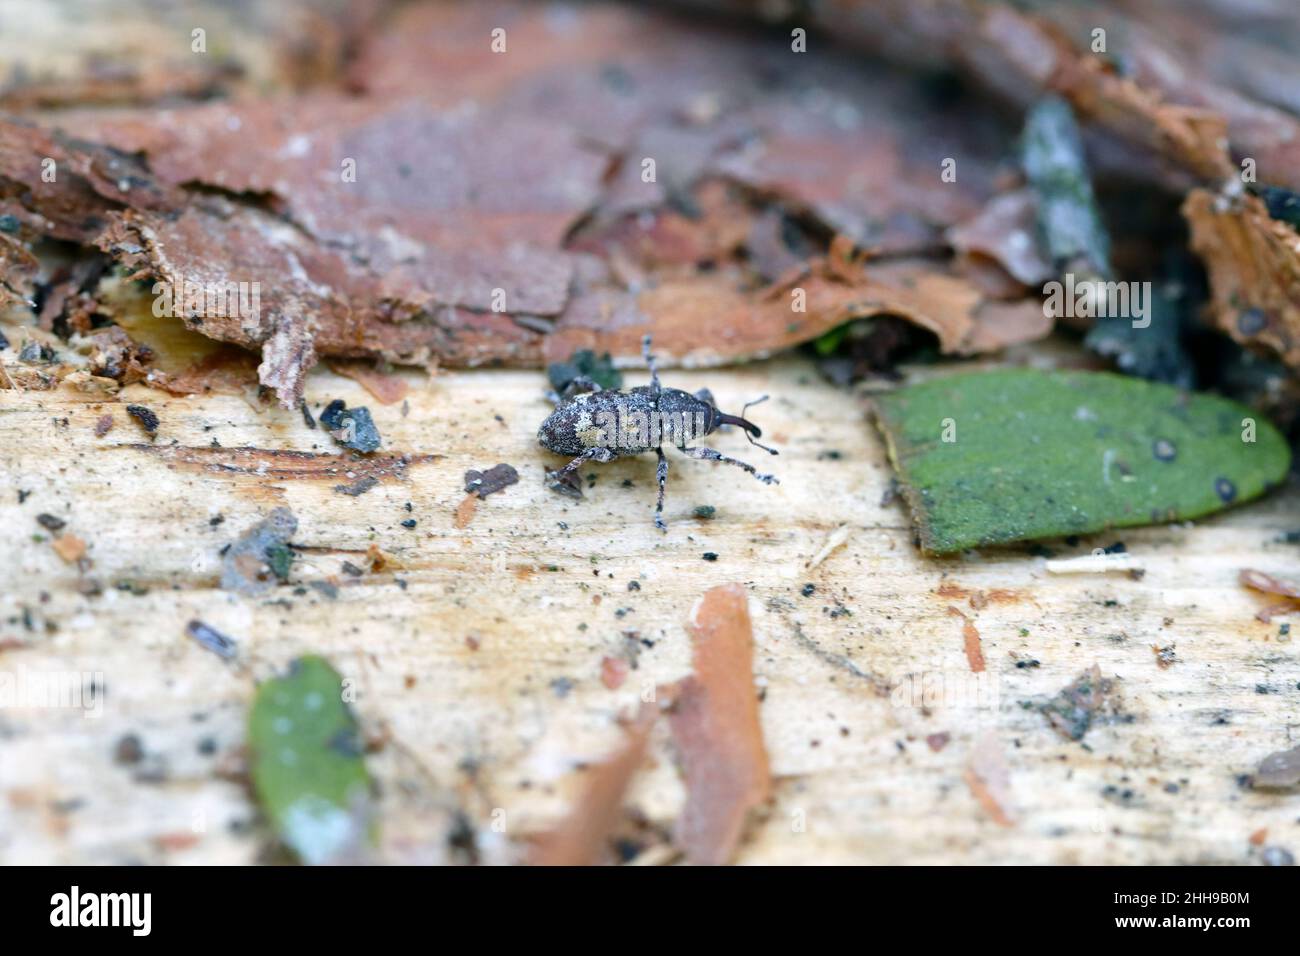 Pine weevil - Pissodes pini on the bark of a pine tree. Stock Photo